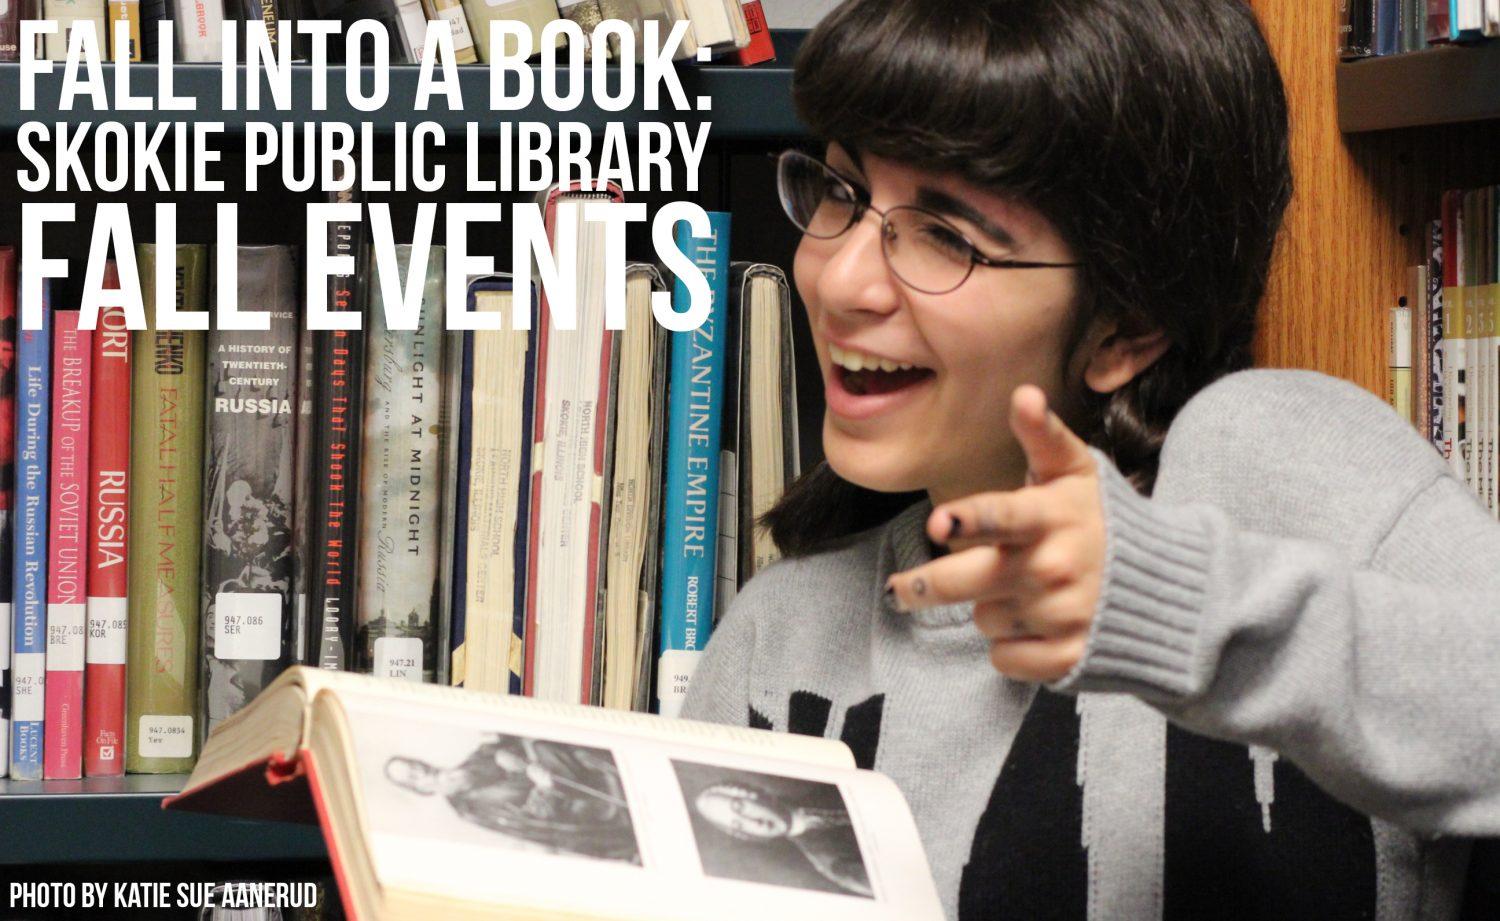 Fall into a new book: Skokie Public Library Fall Events